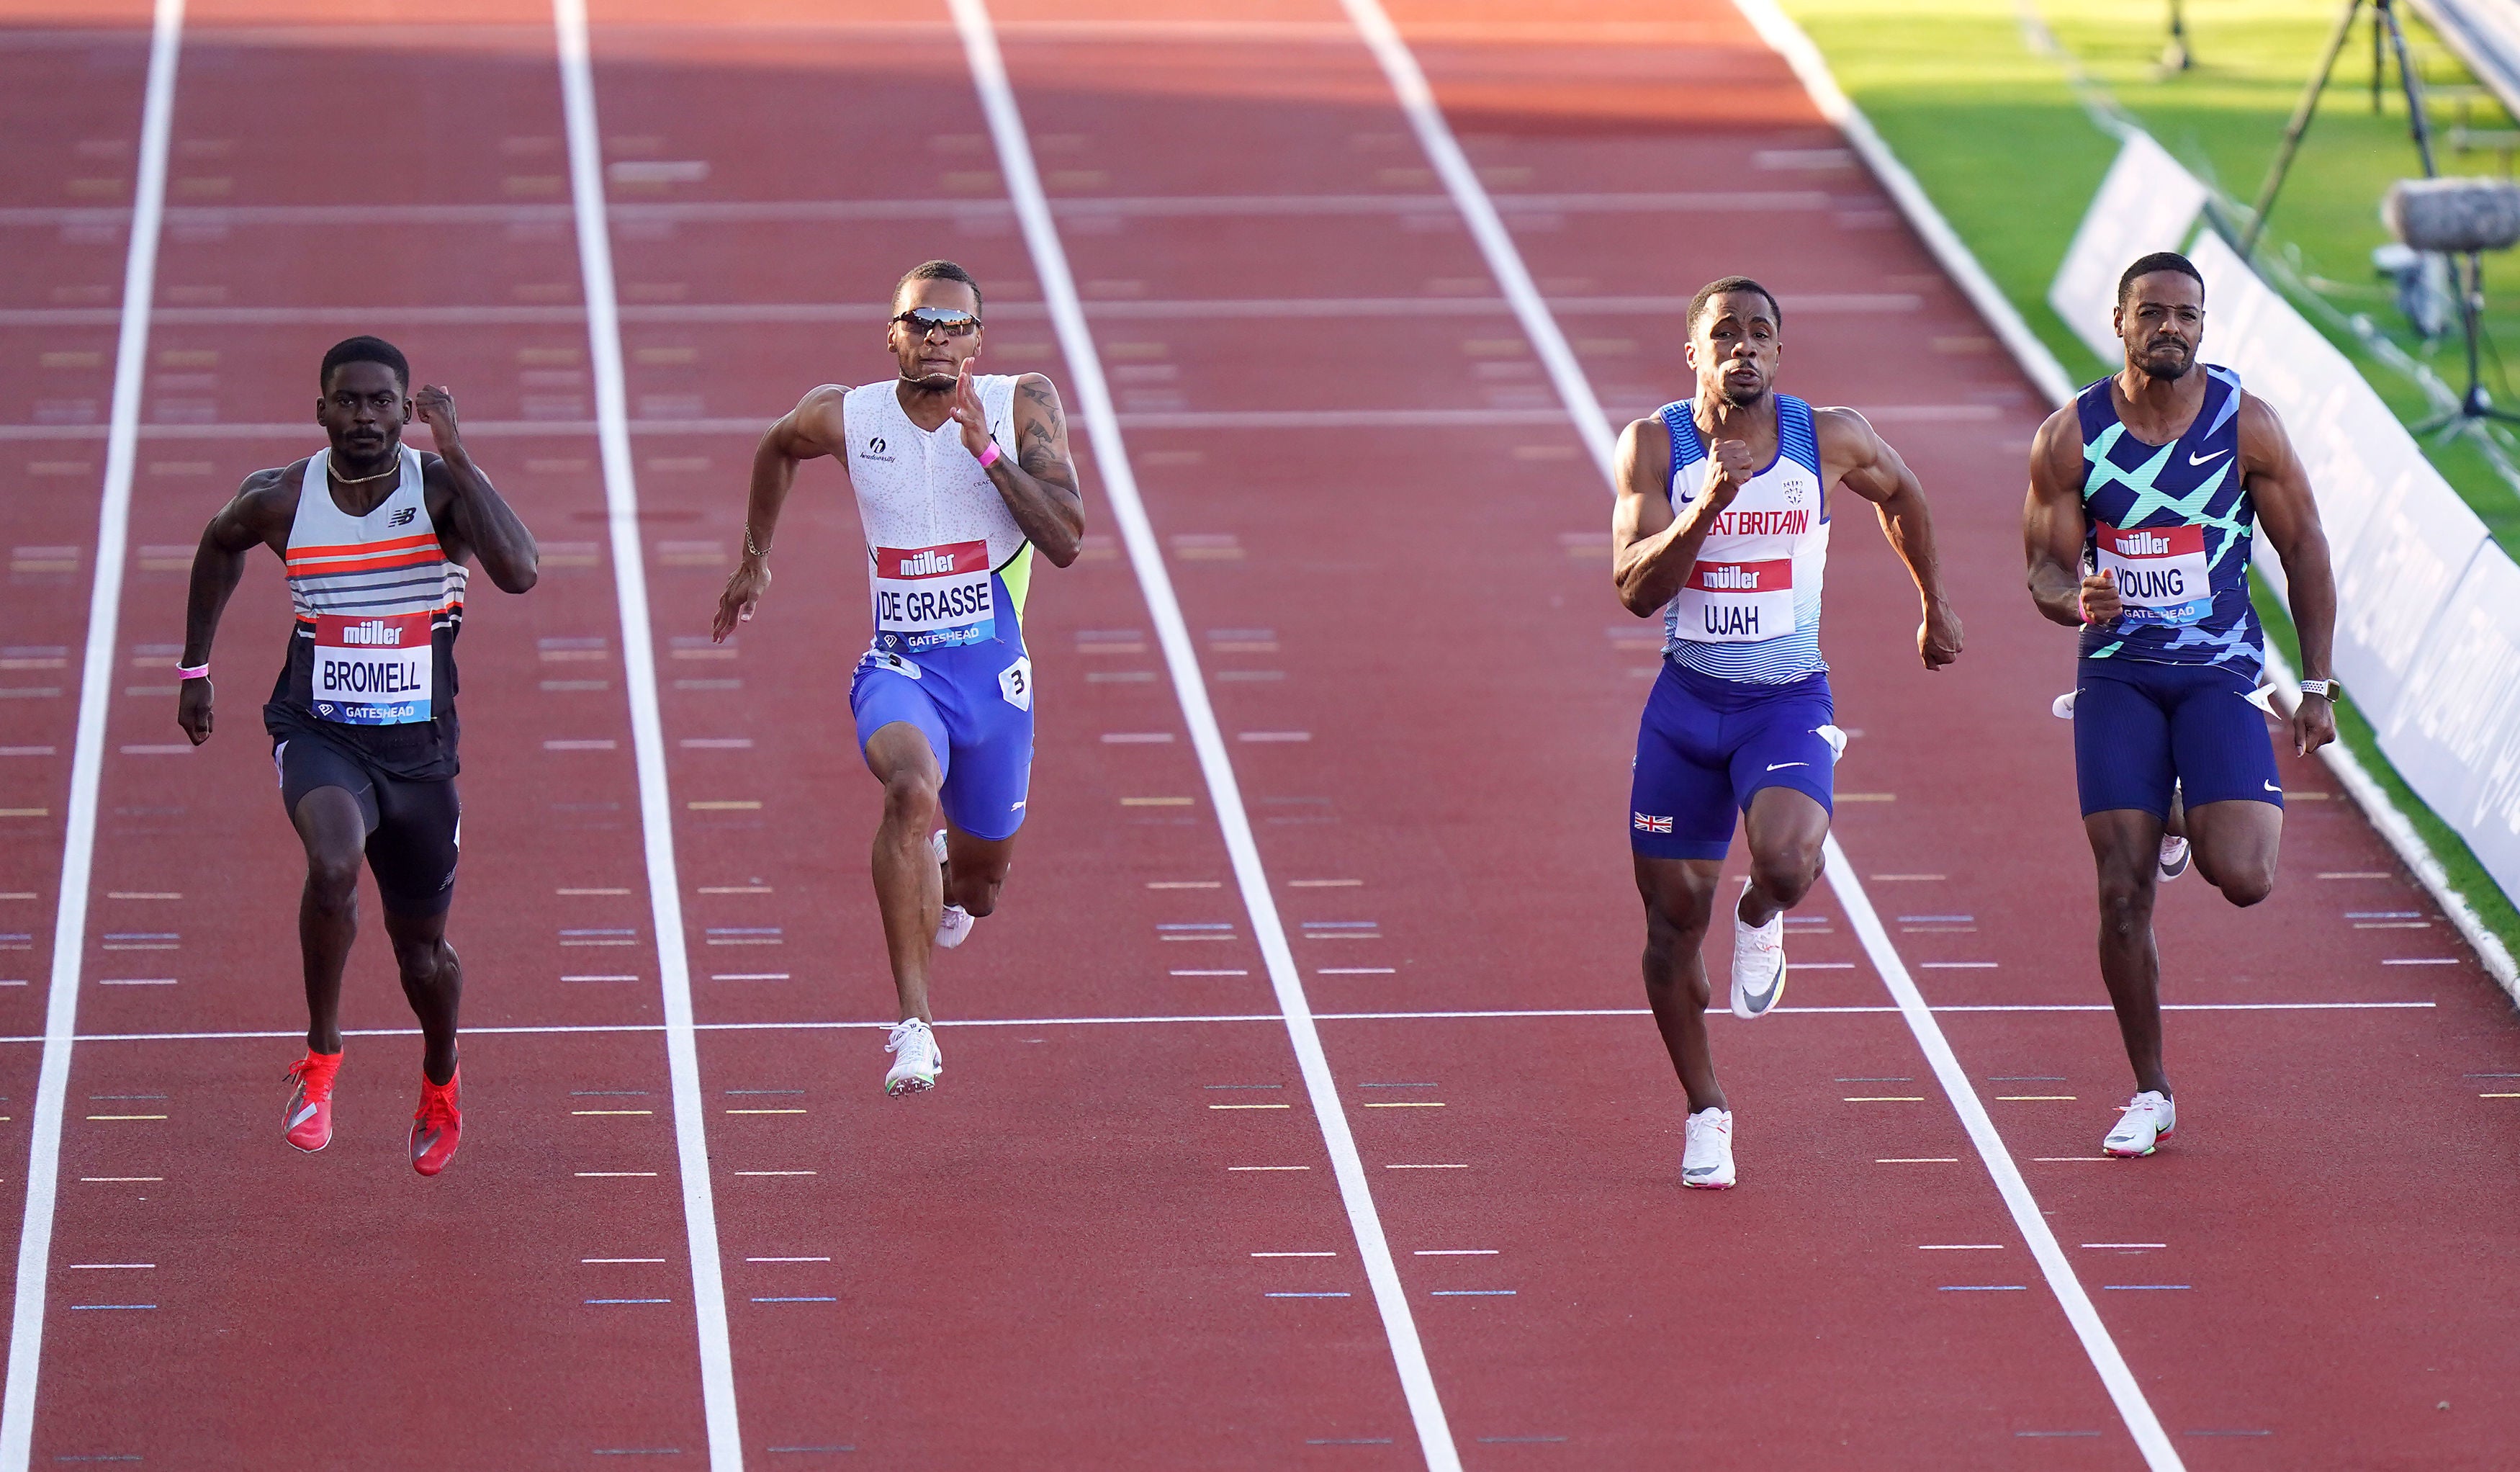 Ujah finishes second to Bromell in the Diamond League at Gateshead earlier this month